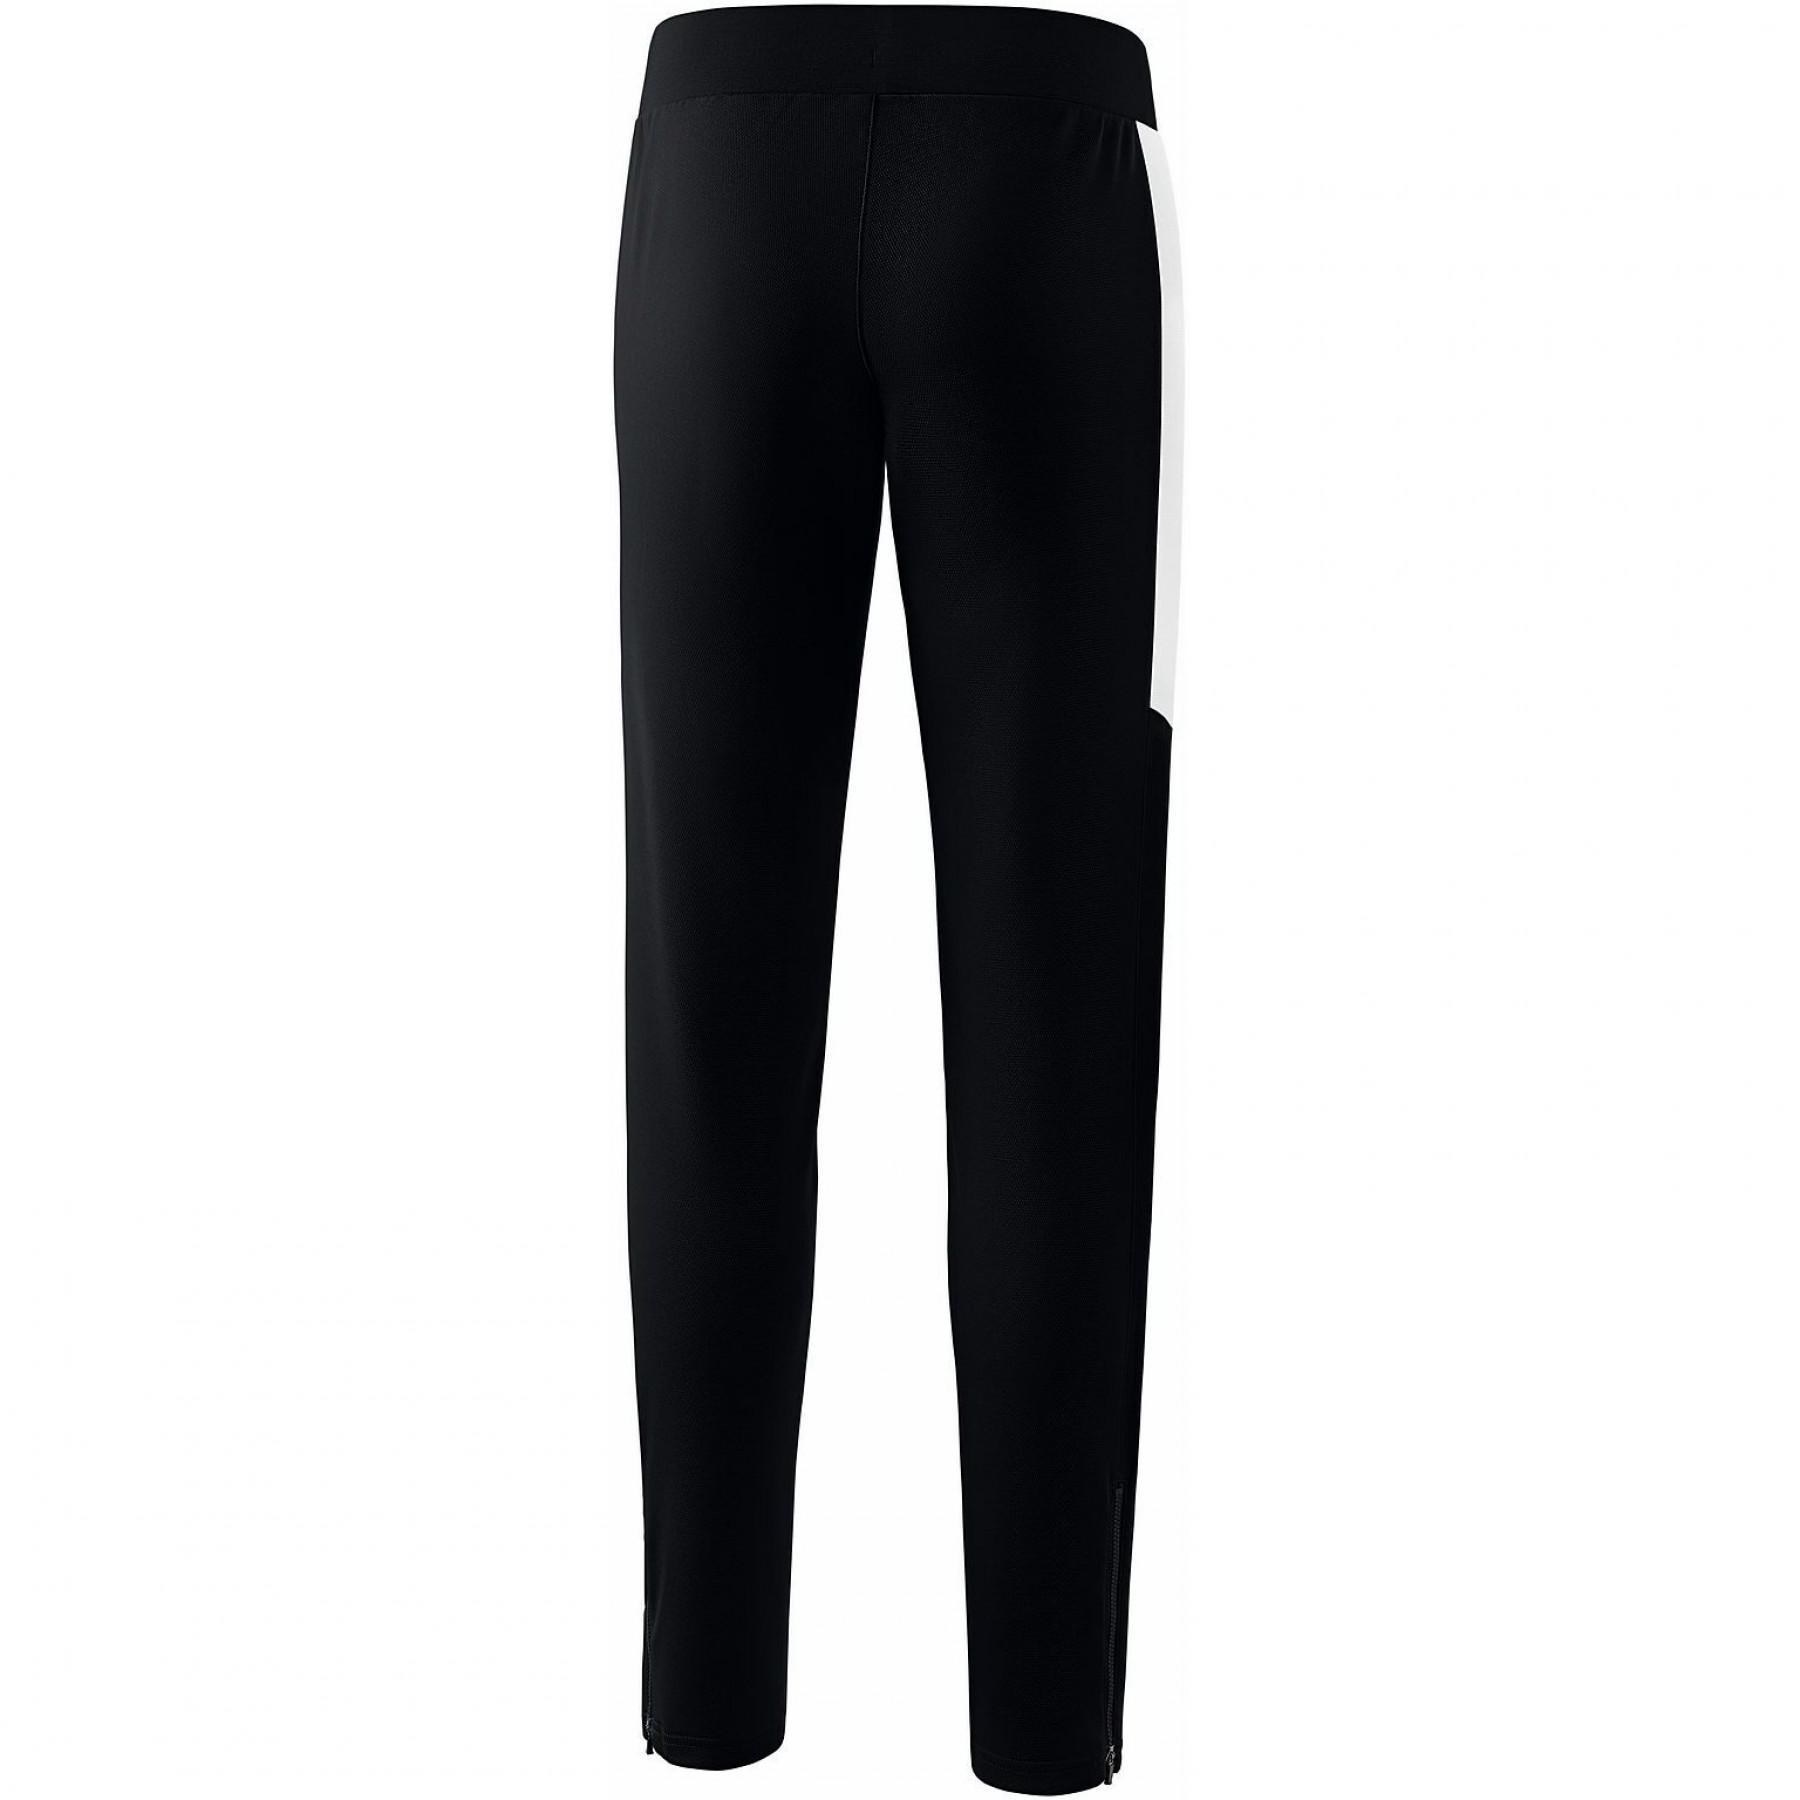 Women's trousers Erima Worker Squad